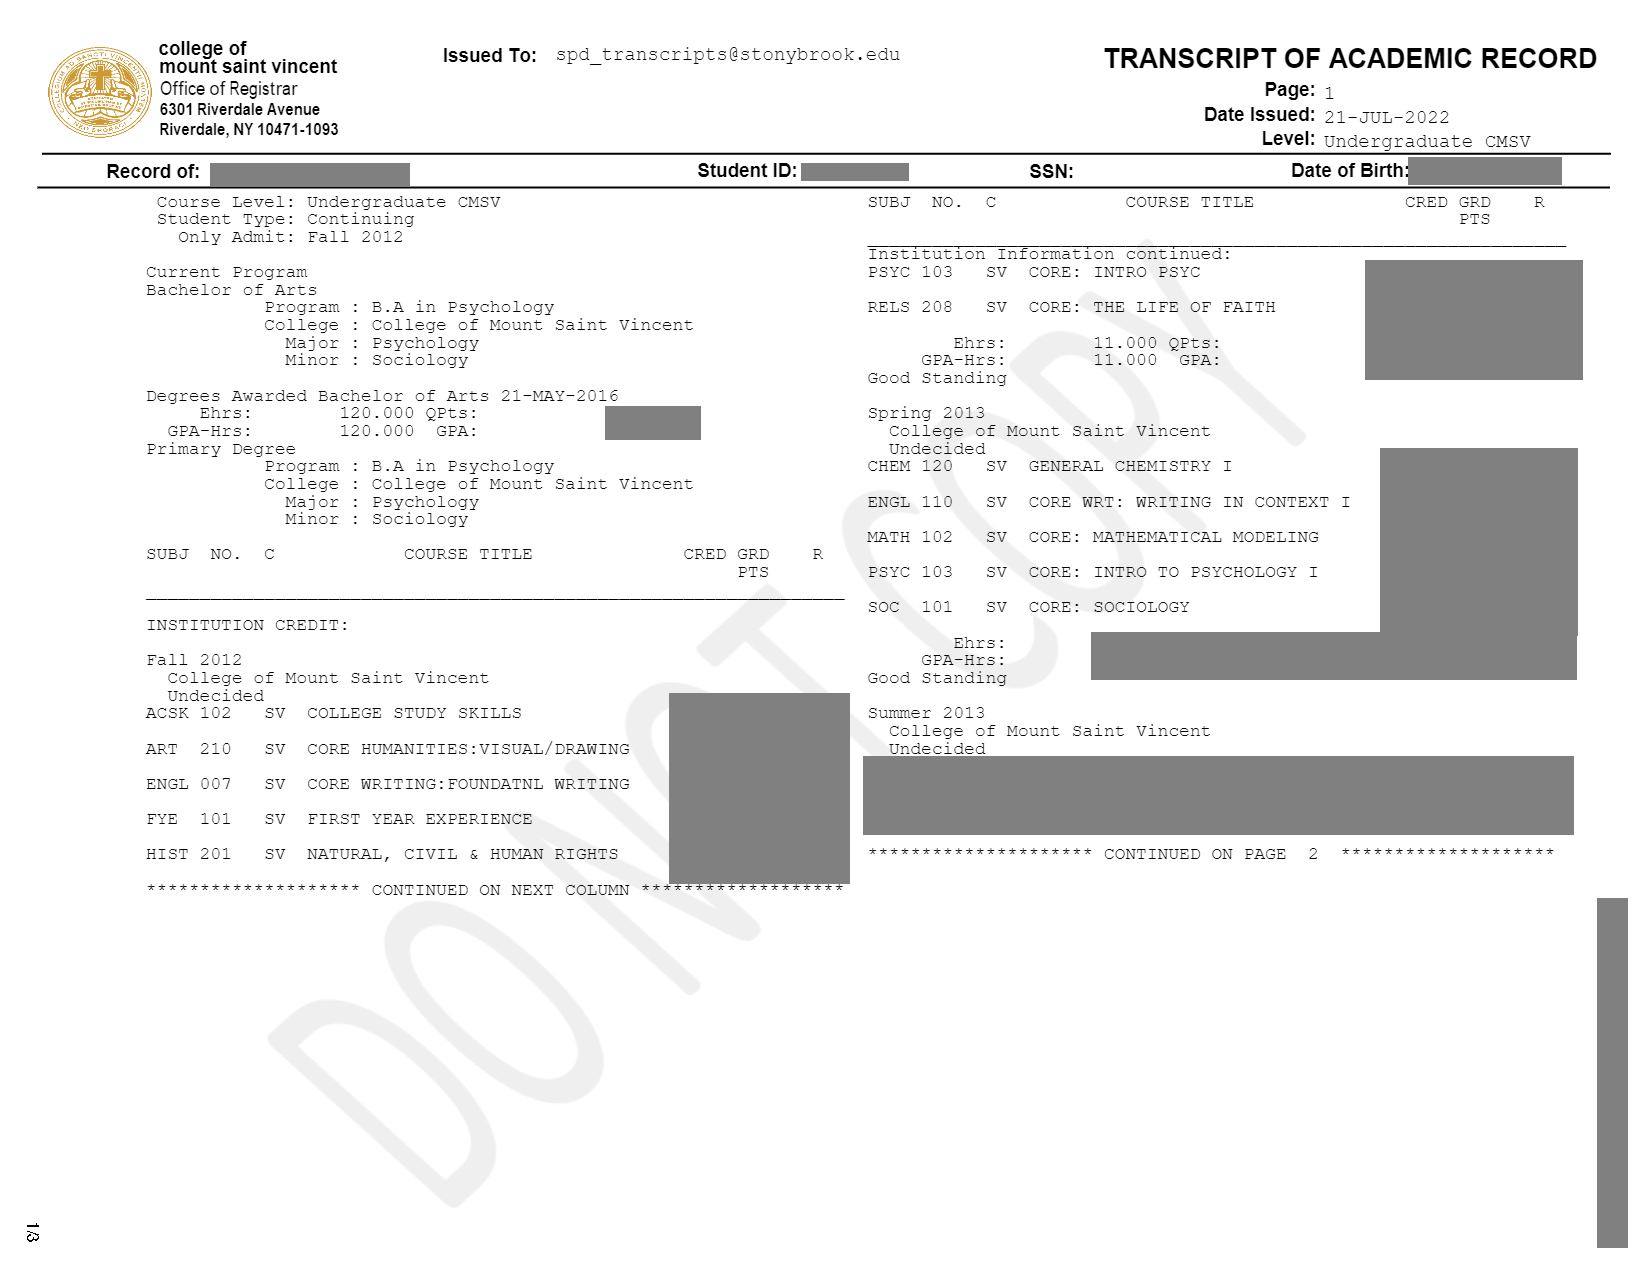 Official transcript from a College with identifying information removed.